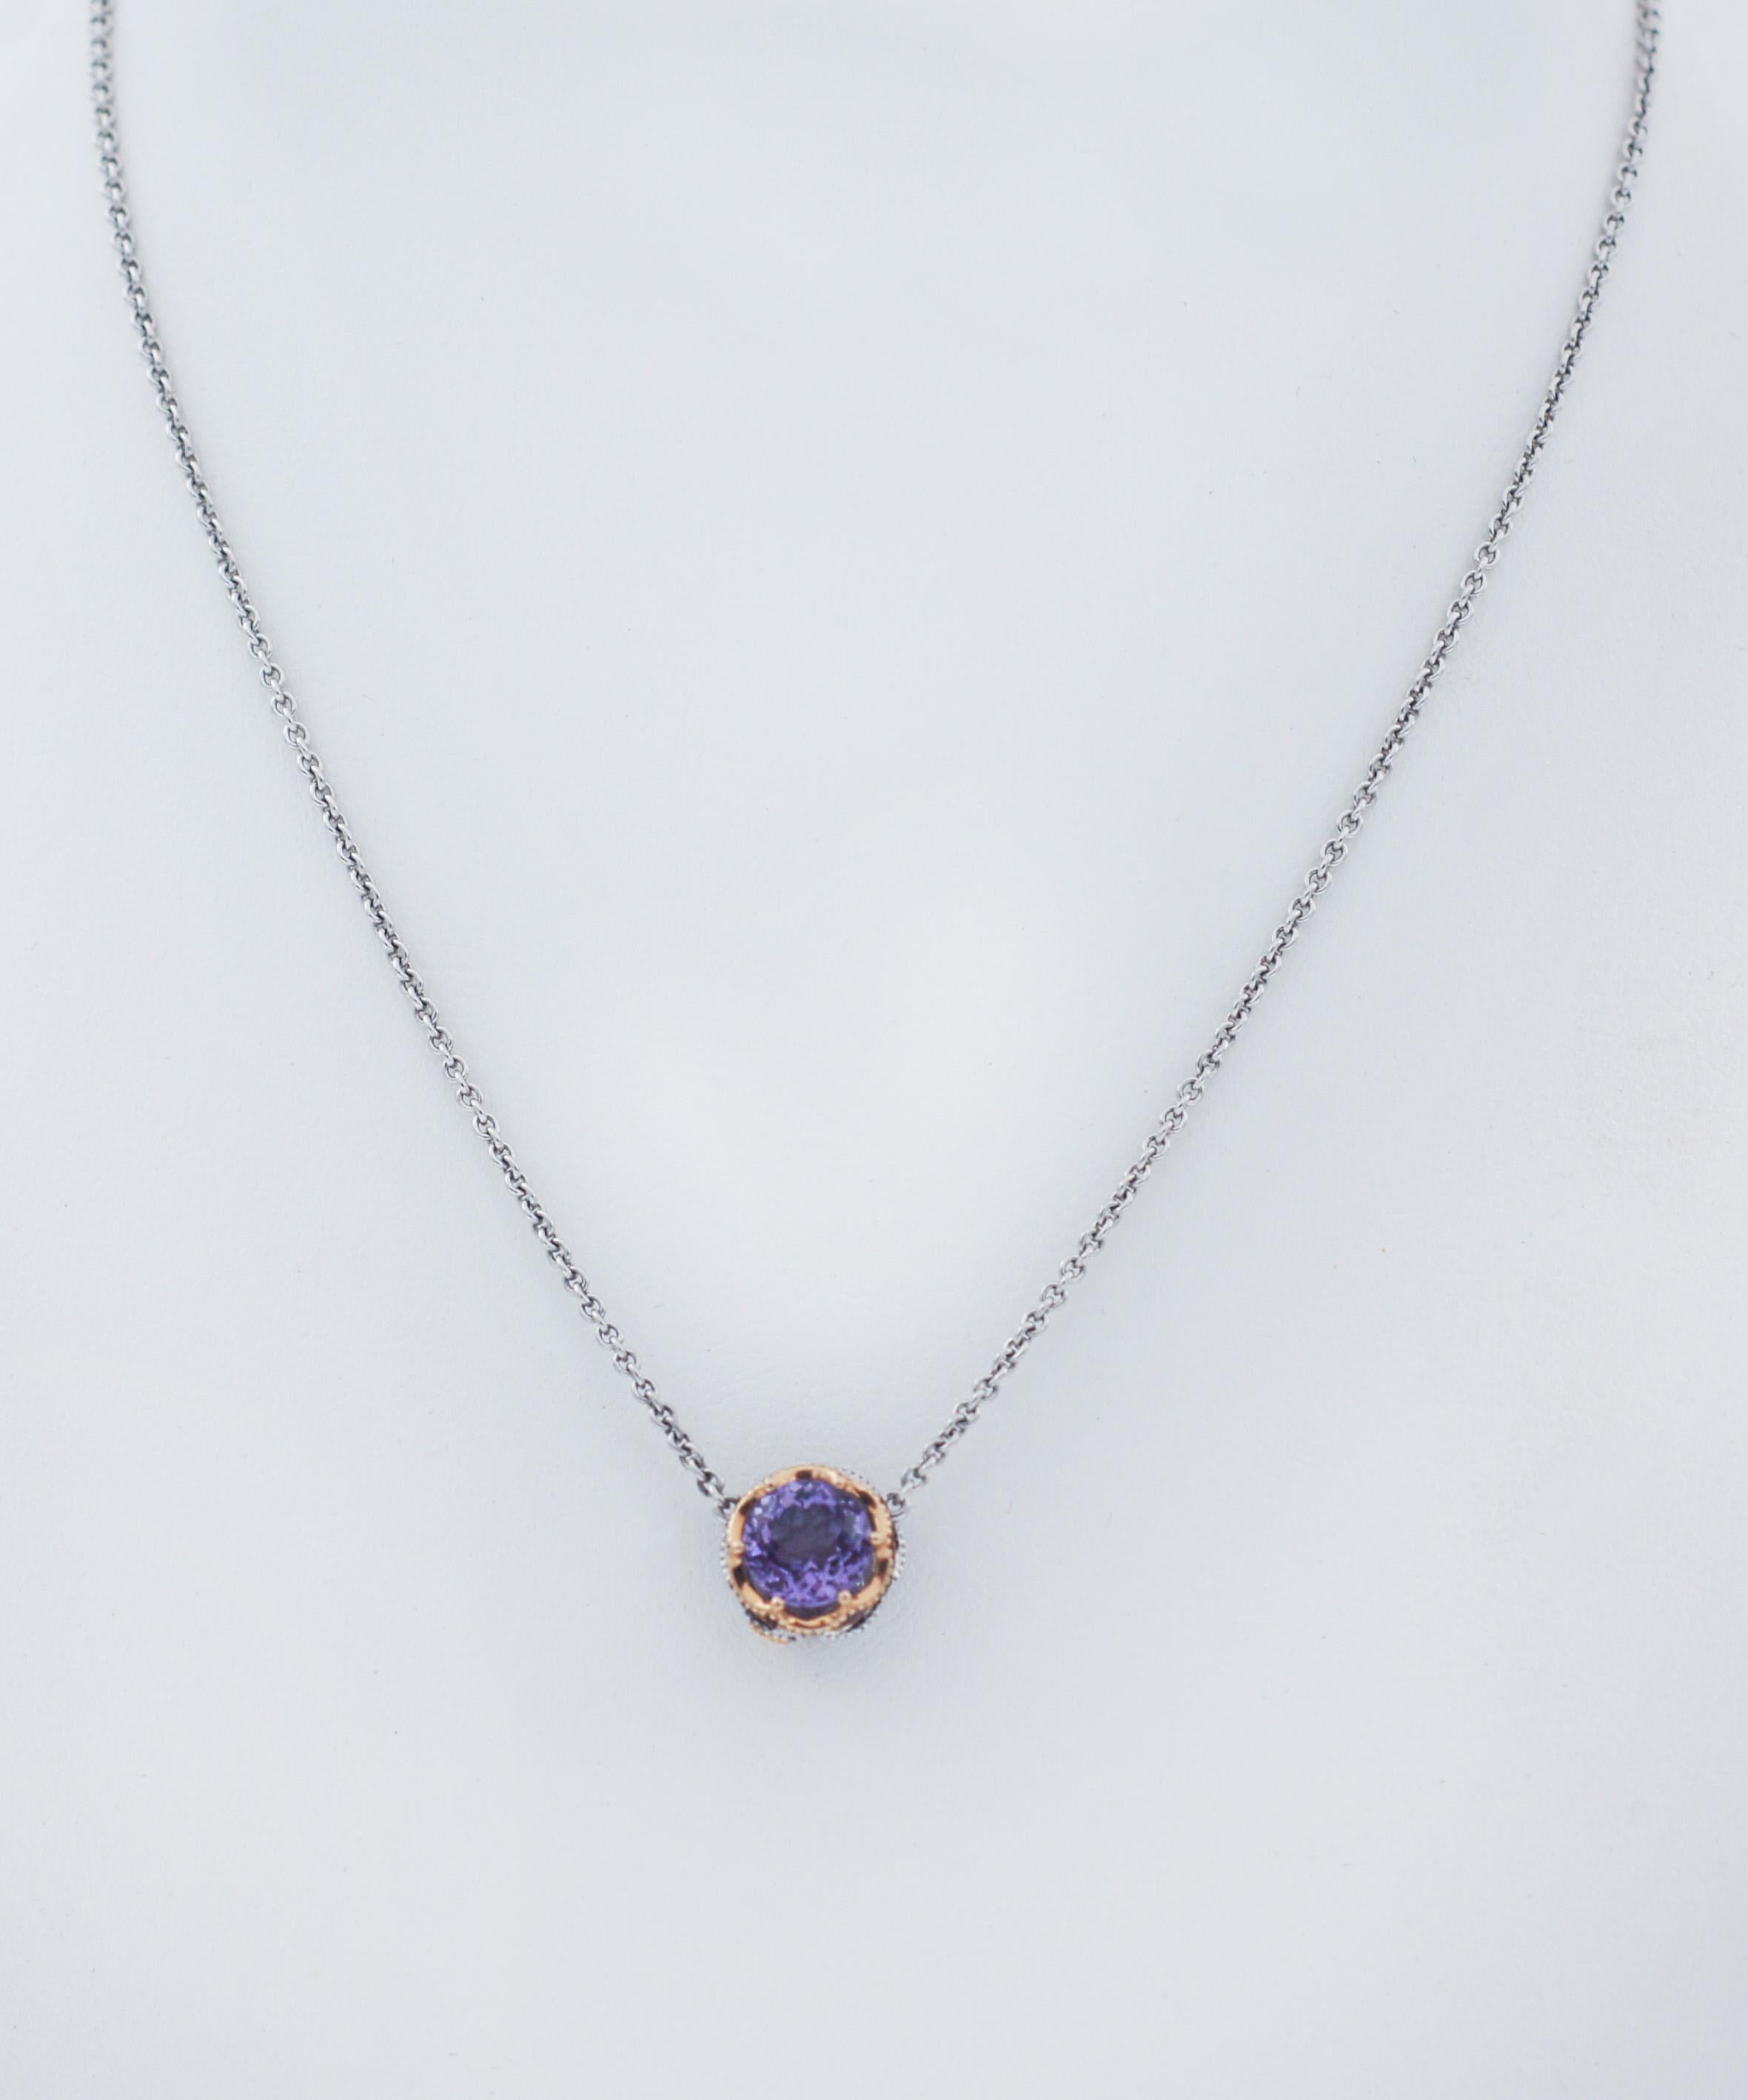 TACORI
Crescent Crown
Crescent Station Necklace featuring Amethyst
STYLE SN204P01
This multifaceted crystal clear Amethyst gemstone and rose gold pendant.
The Amethyst gemstone is encased within a floral rose gold and silver basket with milgrain